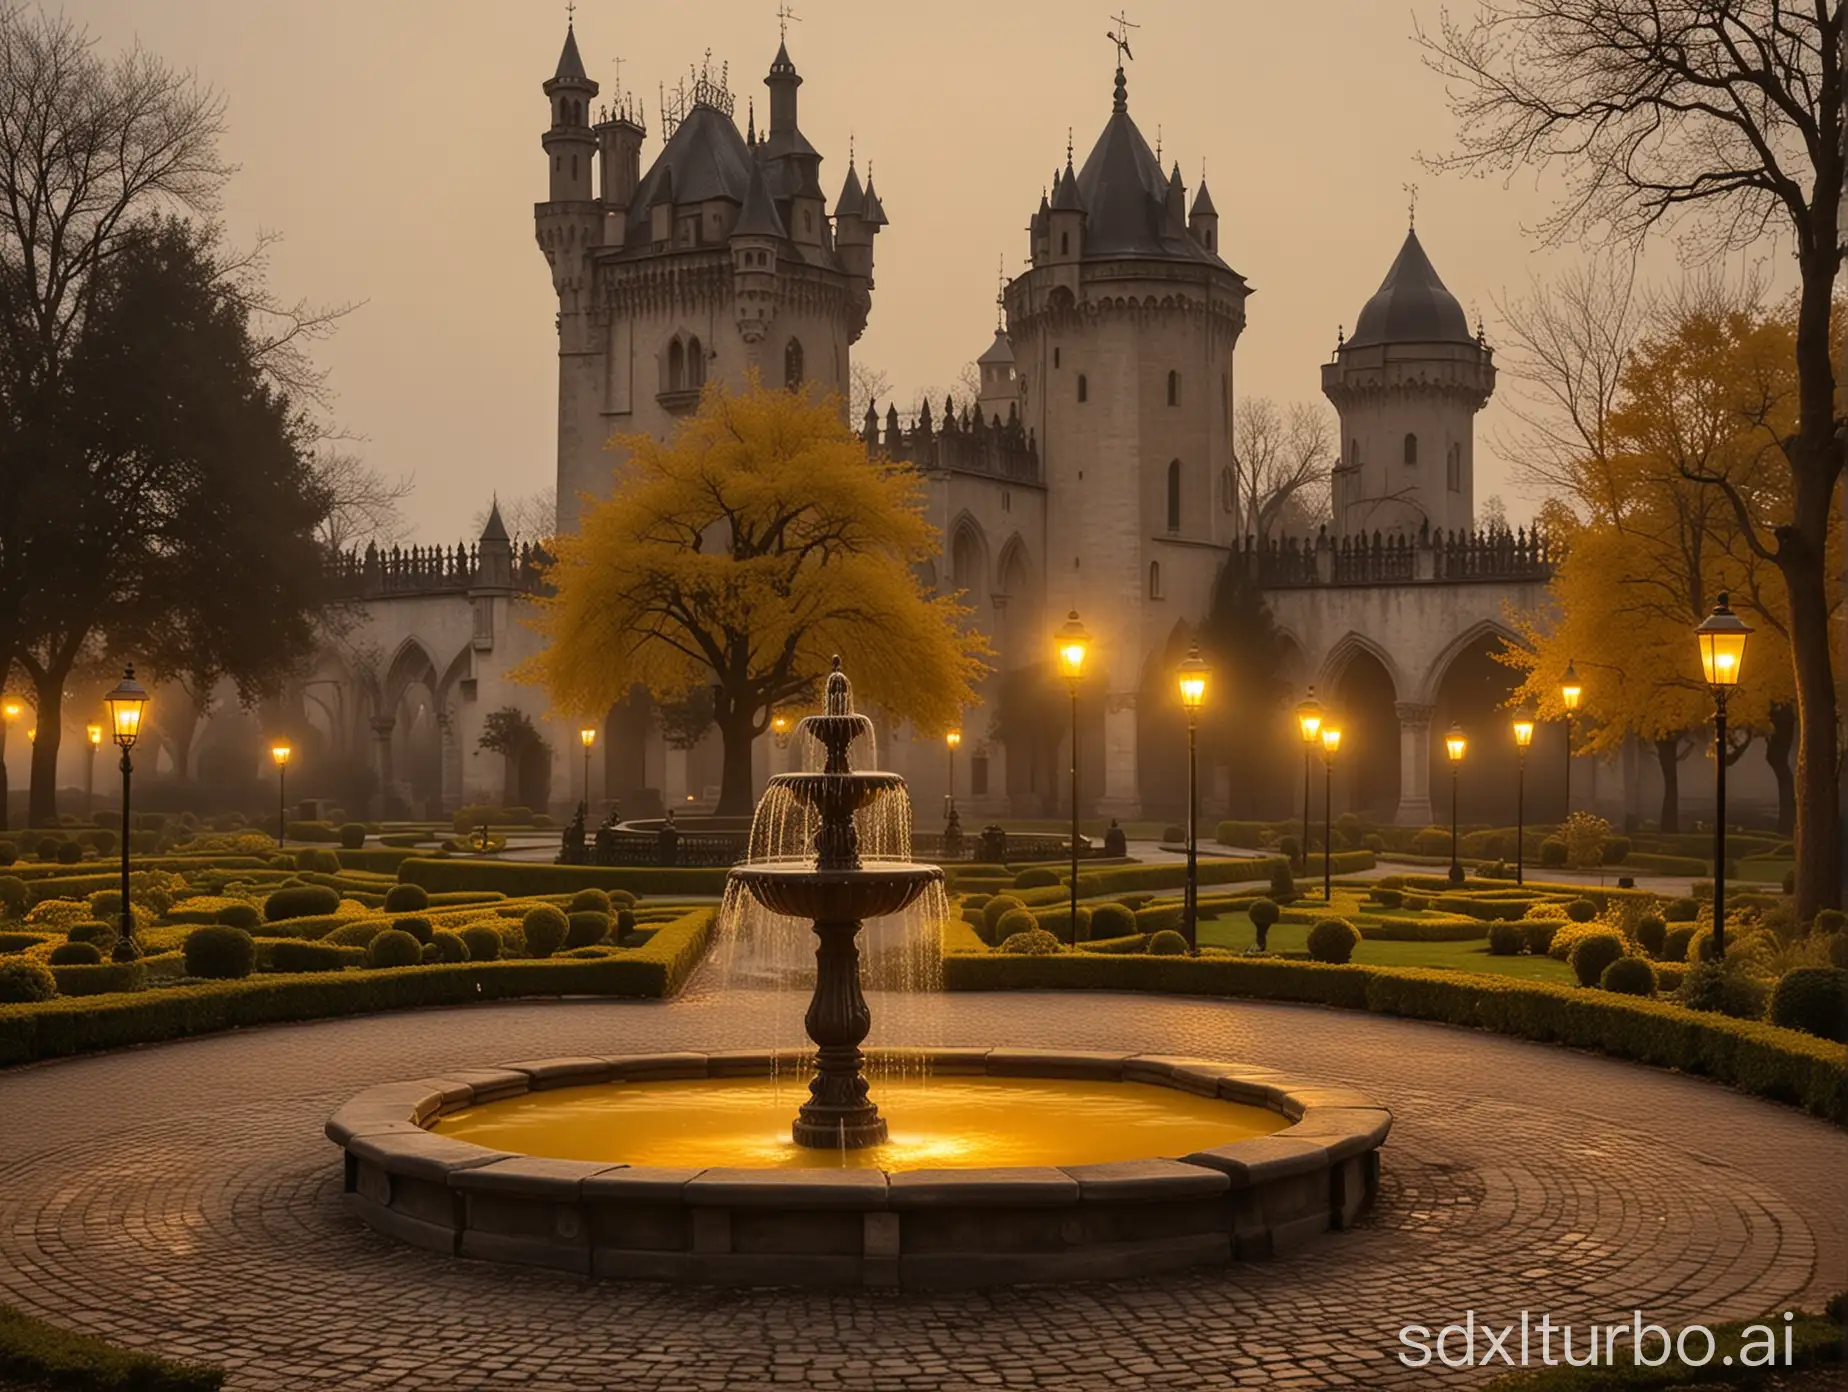 Italian garden of a Gothic castle in Victorian and Orthodox style in the dusk. Yellow atmosphere. Black Romanticism yellow trees. Dervish dressed without arms in Arabic and Victorian black design. Fountain and basin. Art deco design street lamps. Misty evening atmosphere. Yellowish dark gray sky